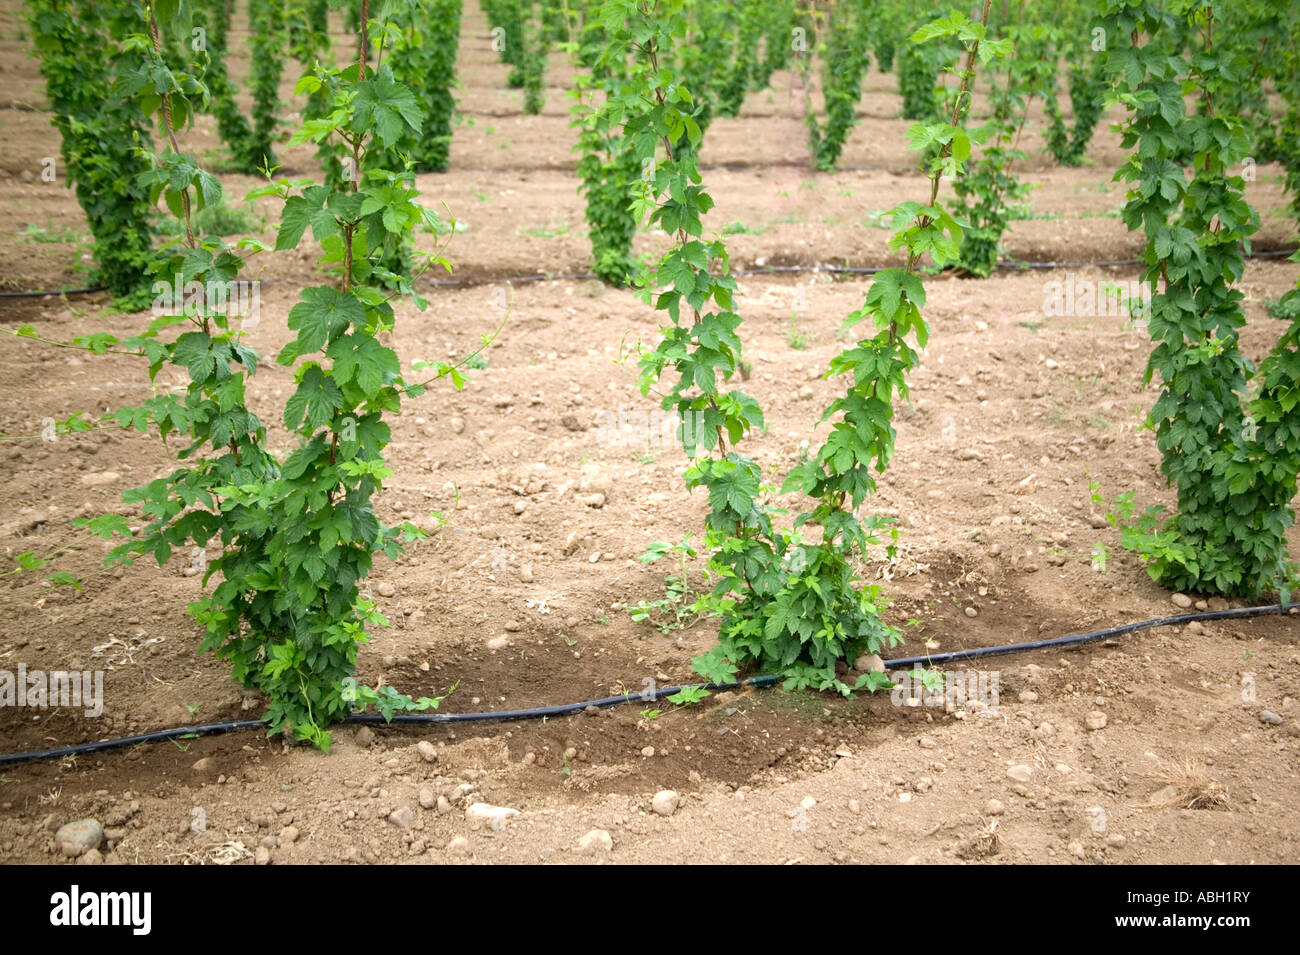 Young hop plants growing in field, Stock Photo